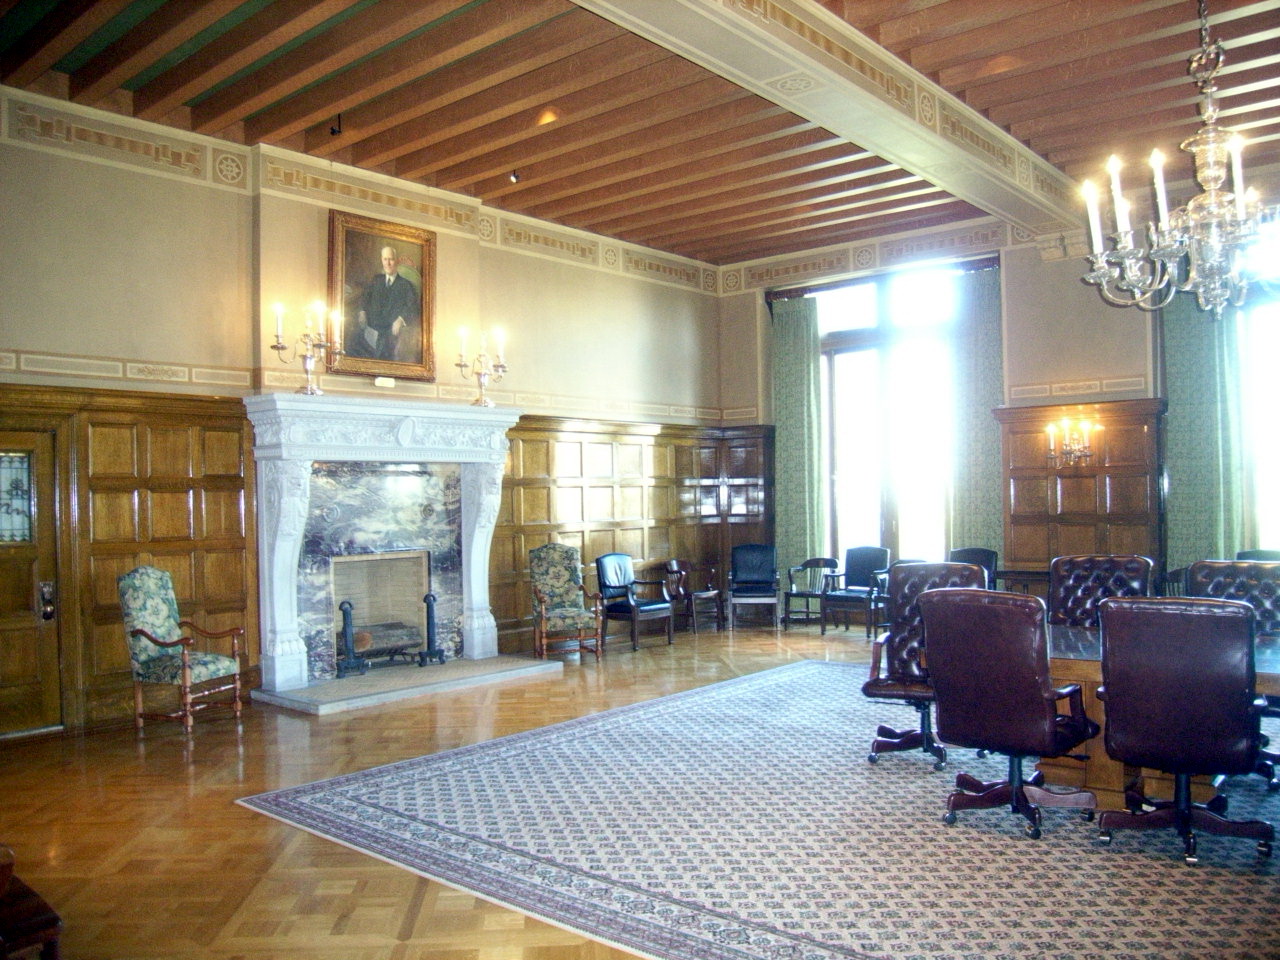 a room with a wooden paneled ceiling, two chairs and fireplace